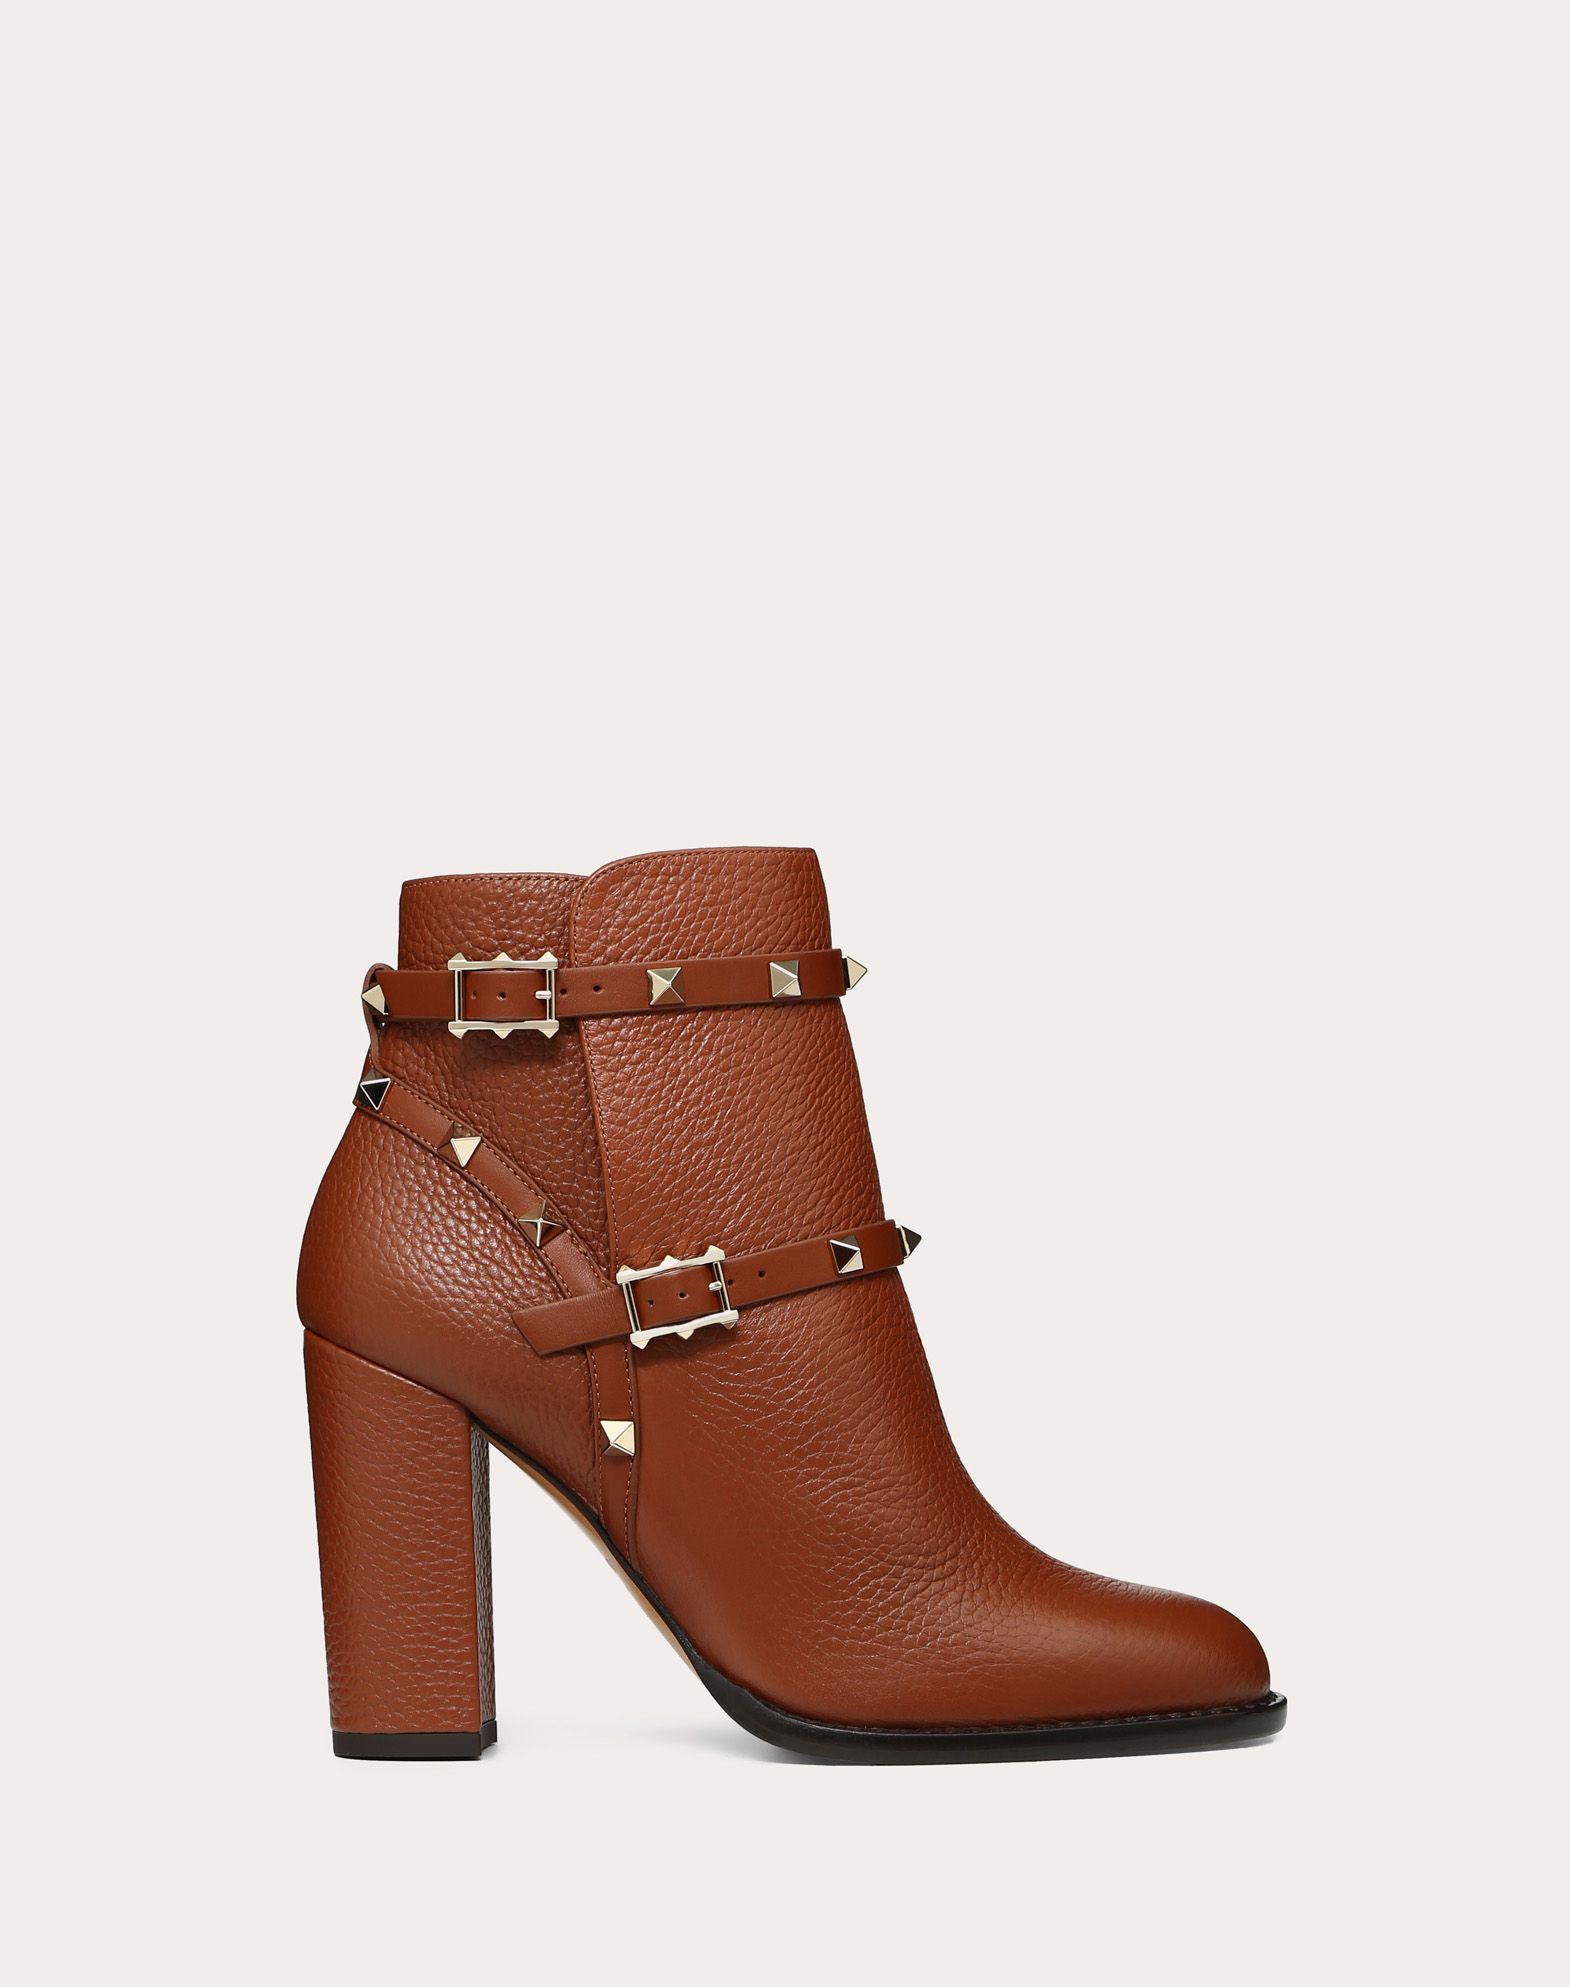 Grain Calfskin Leather Rockstud Bootie 100mm for Woman | Valentino ...